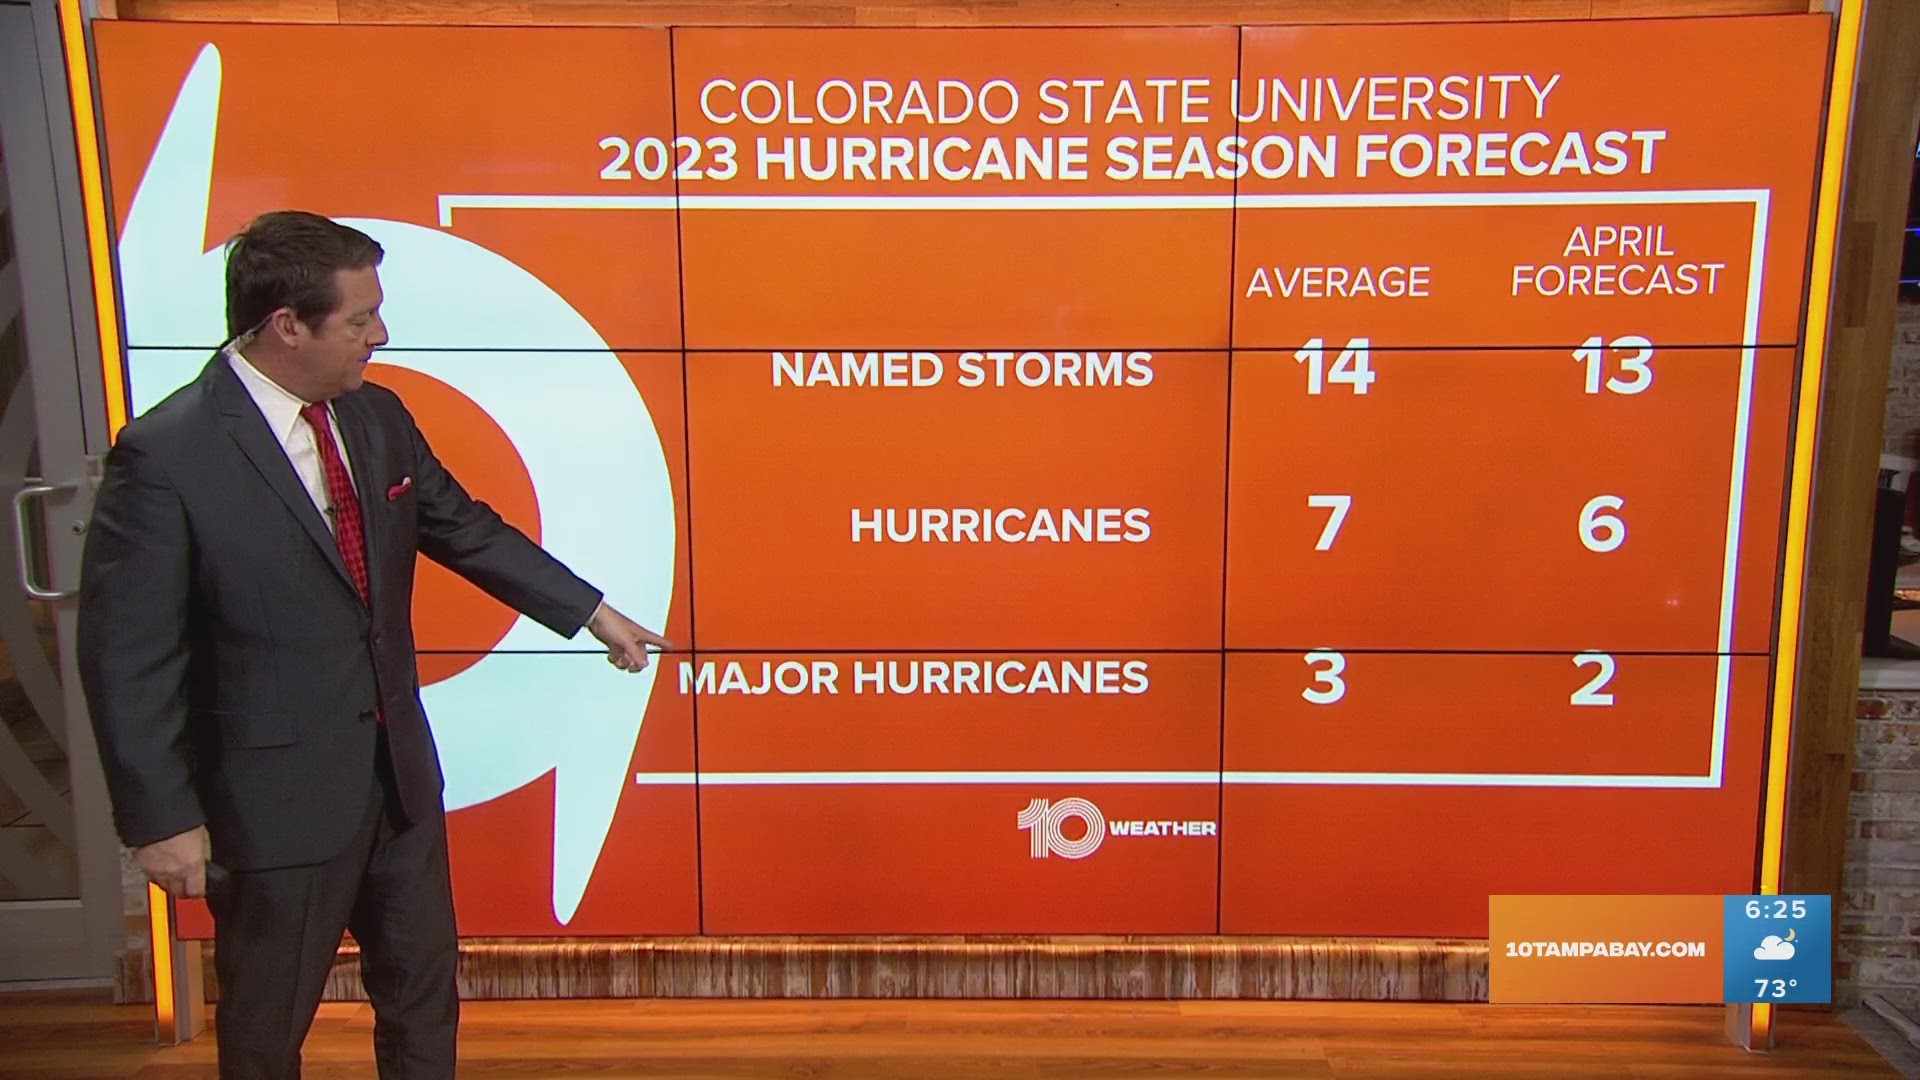 Colorado State University has issued its forecast for the 2023 Atlantic hurricane season with numbers just slightly below average.